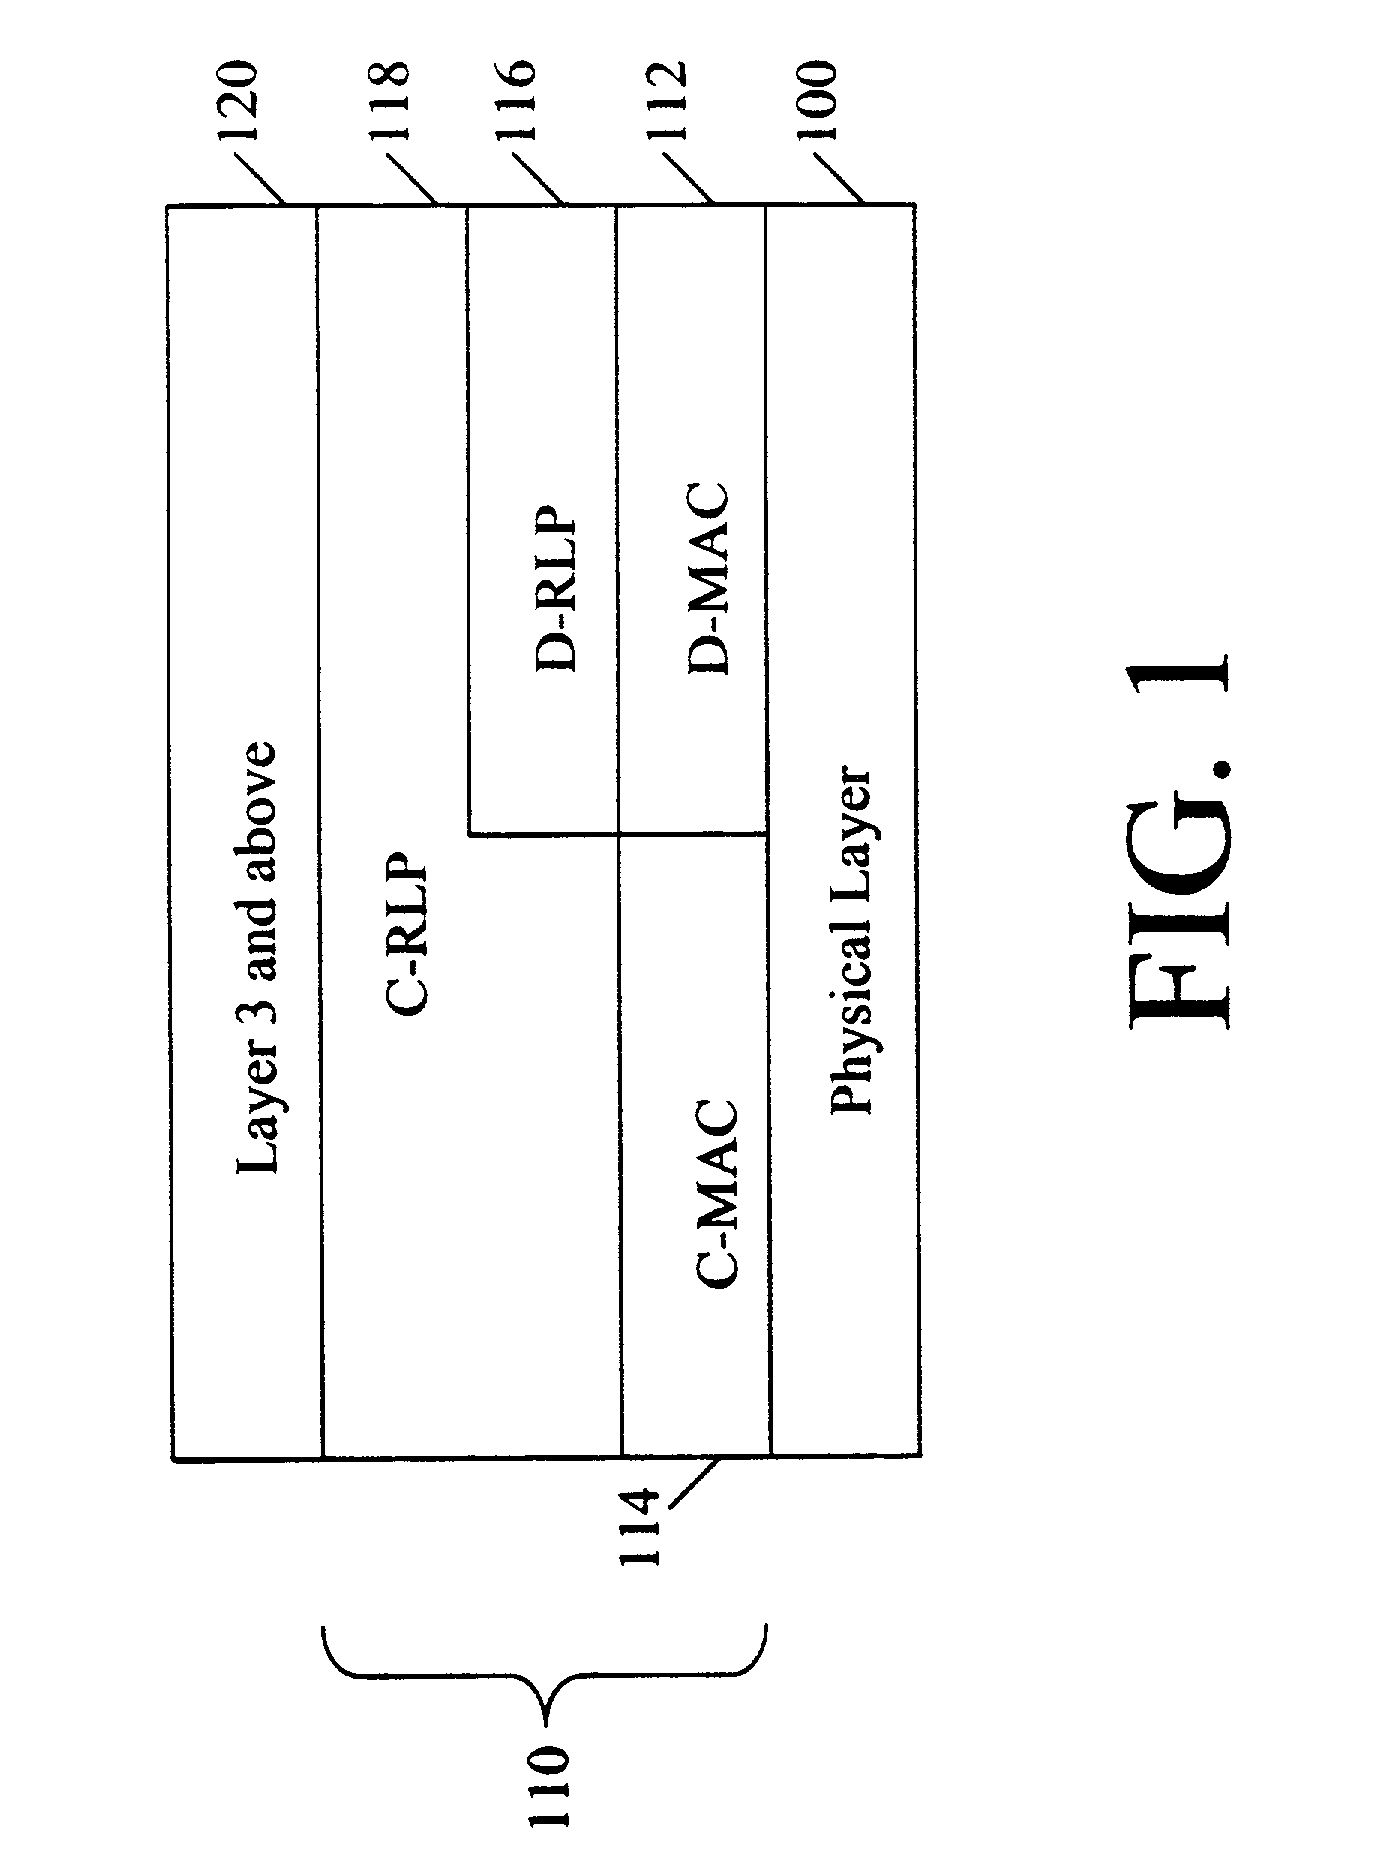 Dynamic, dual-mode wireless network architecture with a split layer 2 protocol